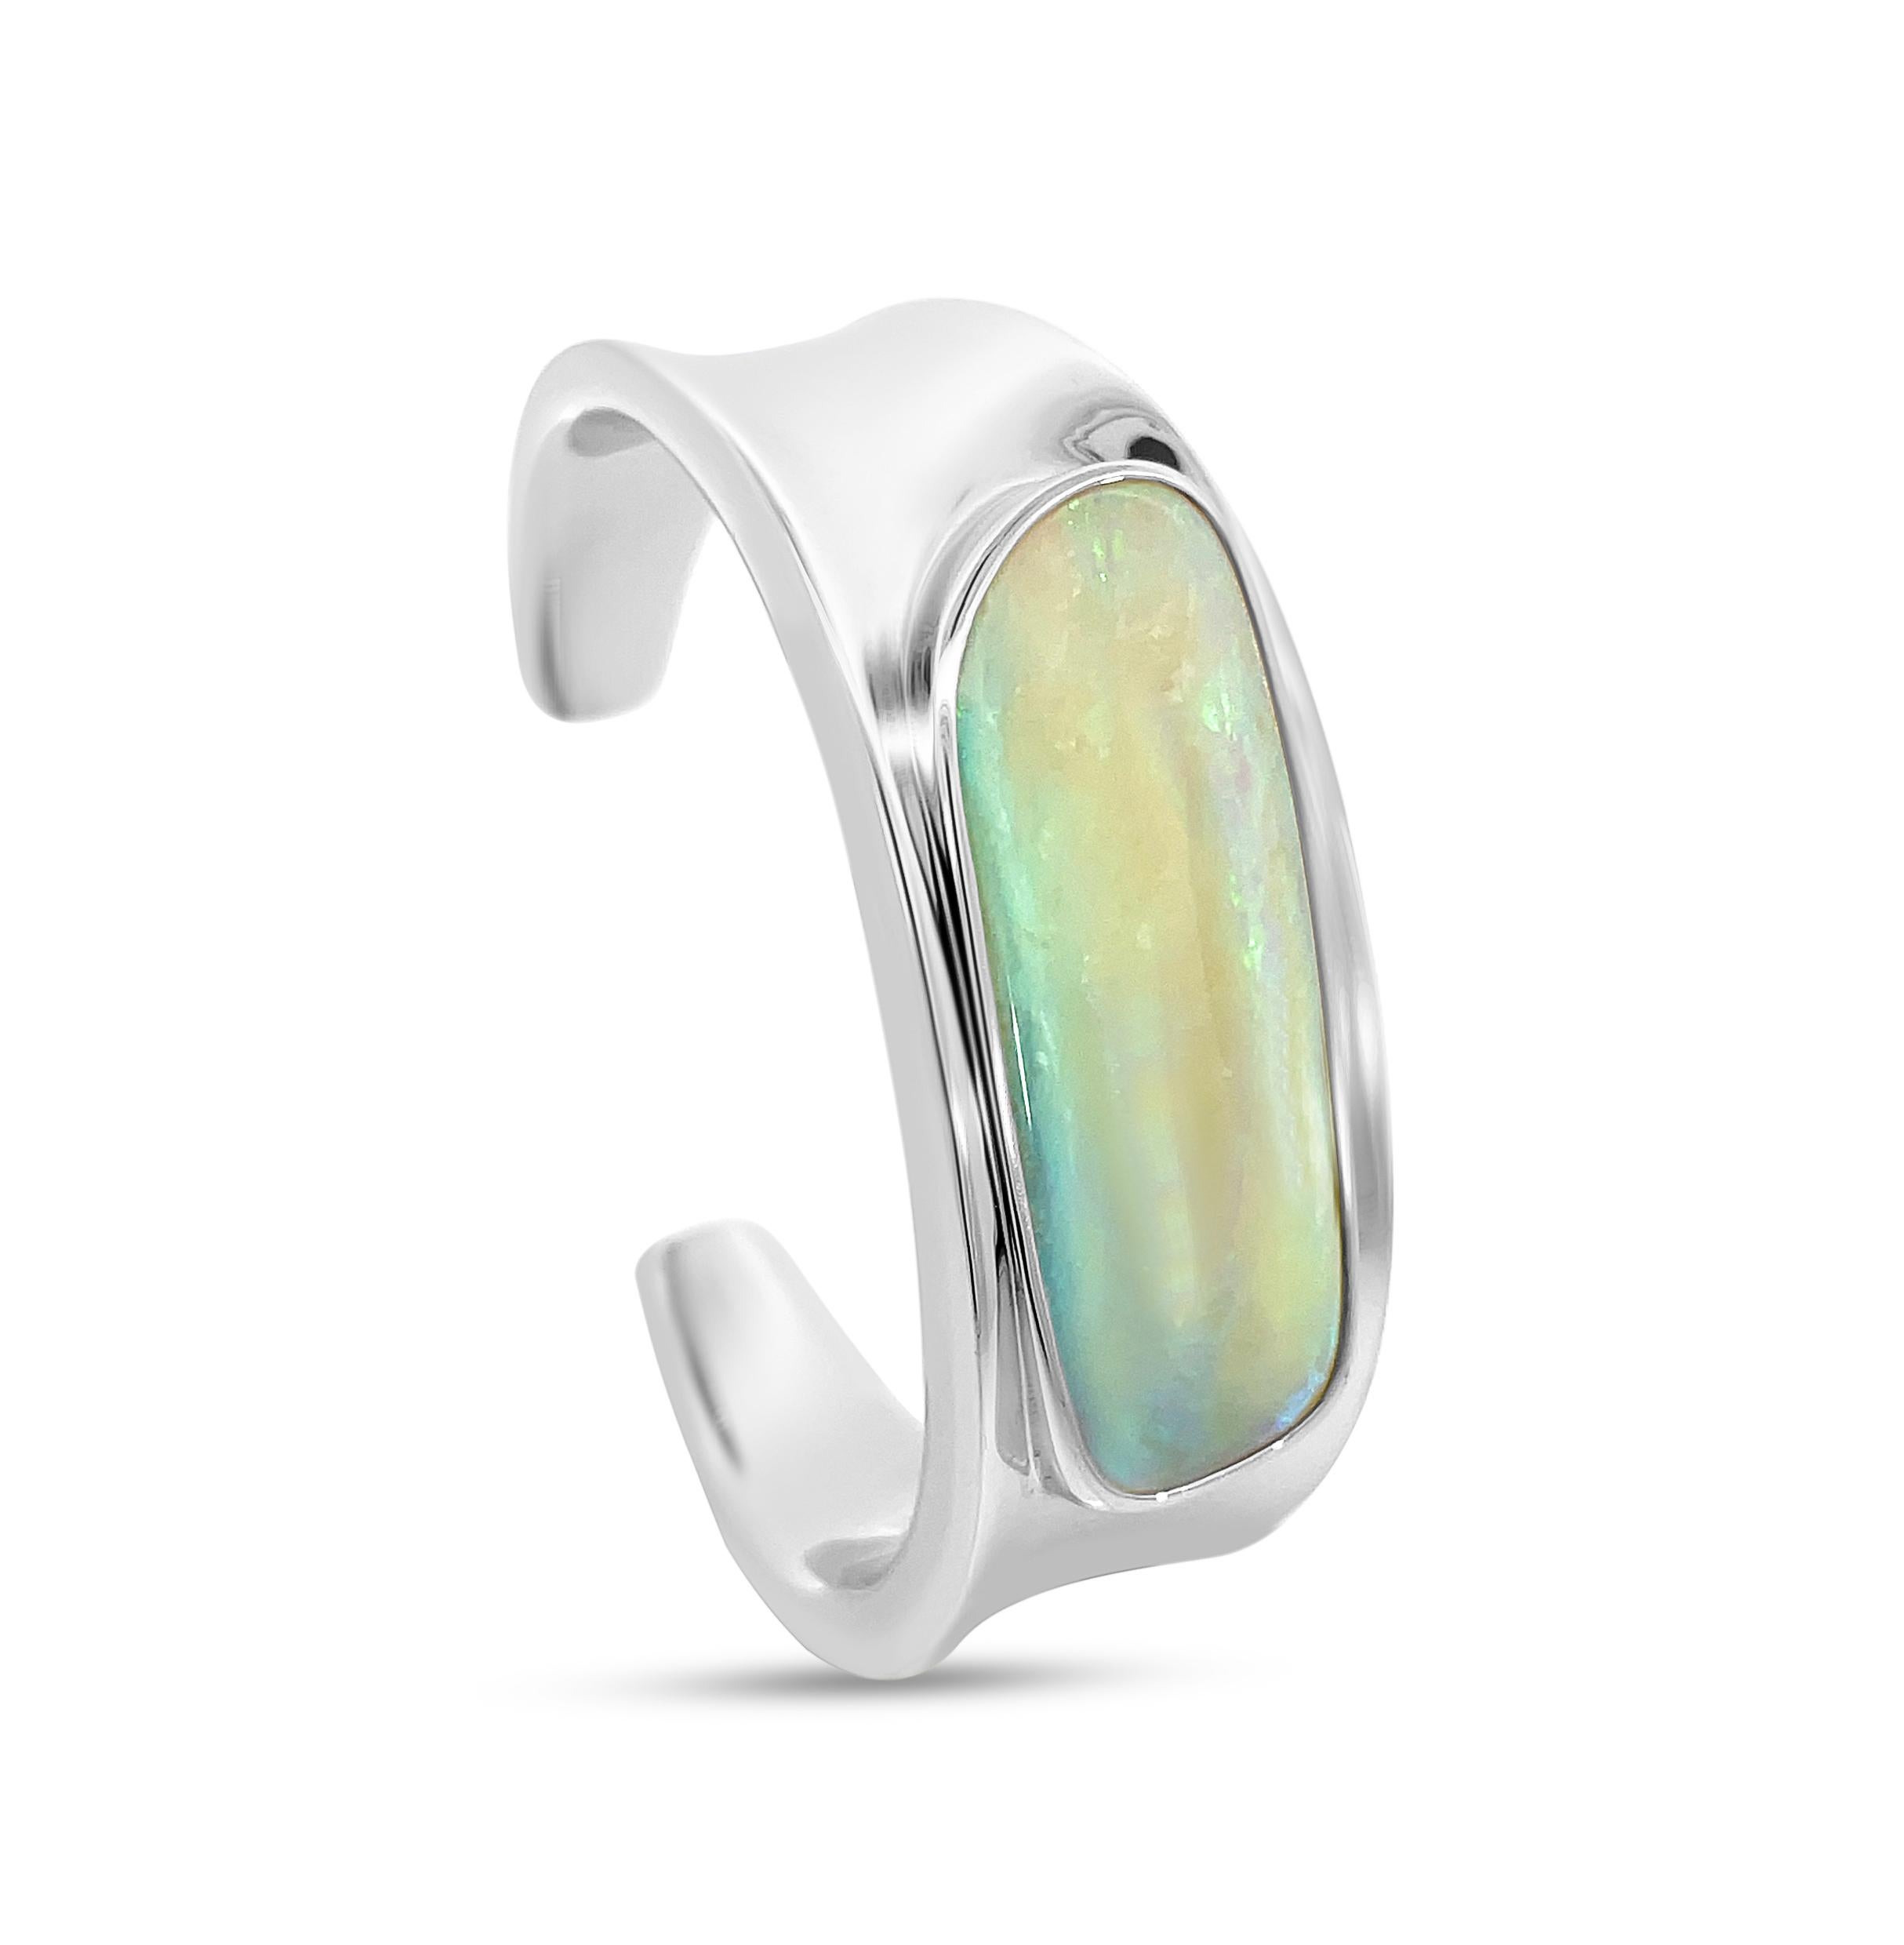 The captivating “Aurora Whisper” opal bangle bracelet, adorned with an exquisite 43.77ct boulder opal sourced directly from our own mine in Jundah, Queensland, Australia. Expertly crafted, this luminous piece showcases striking pastel hues,